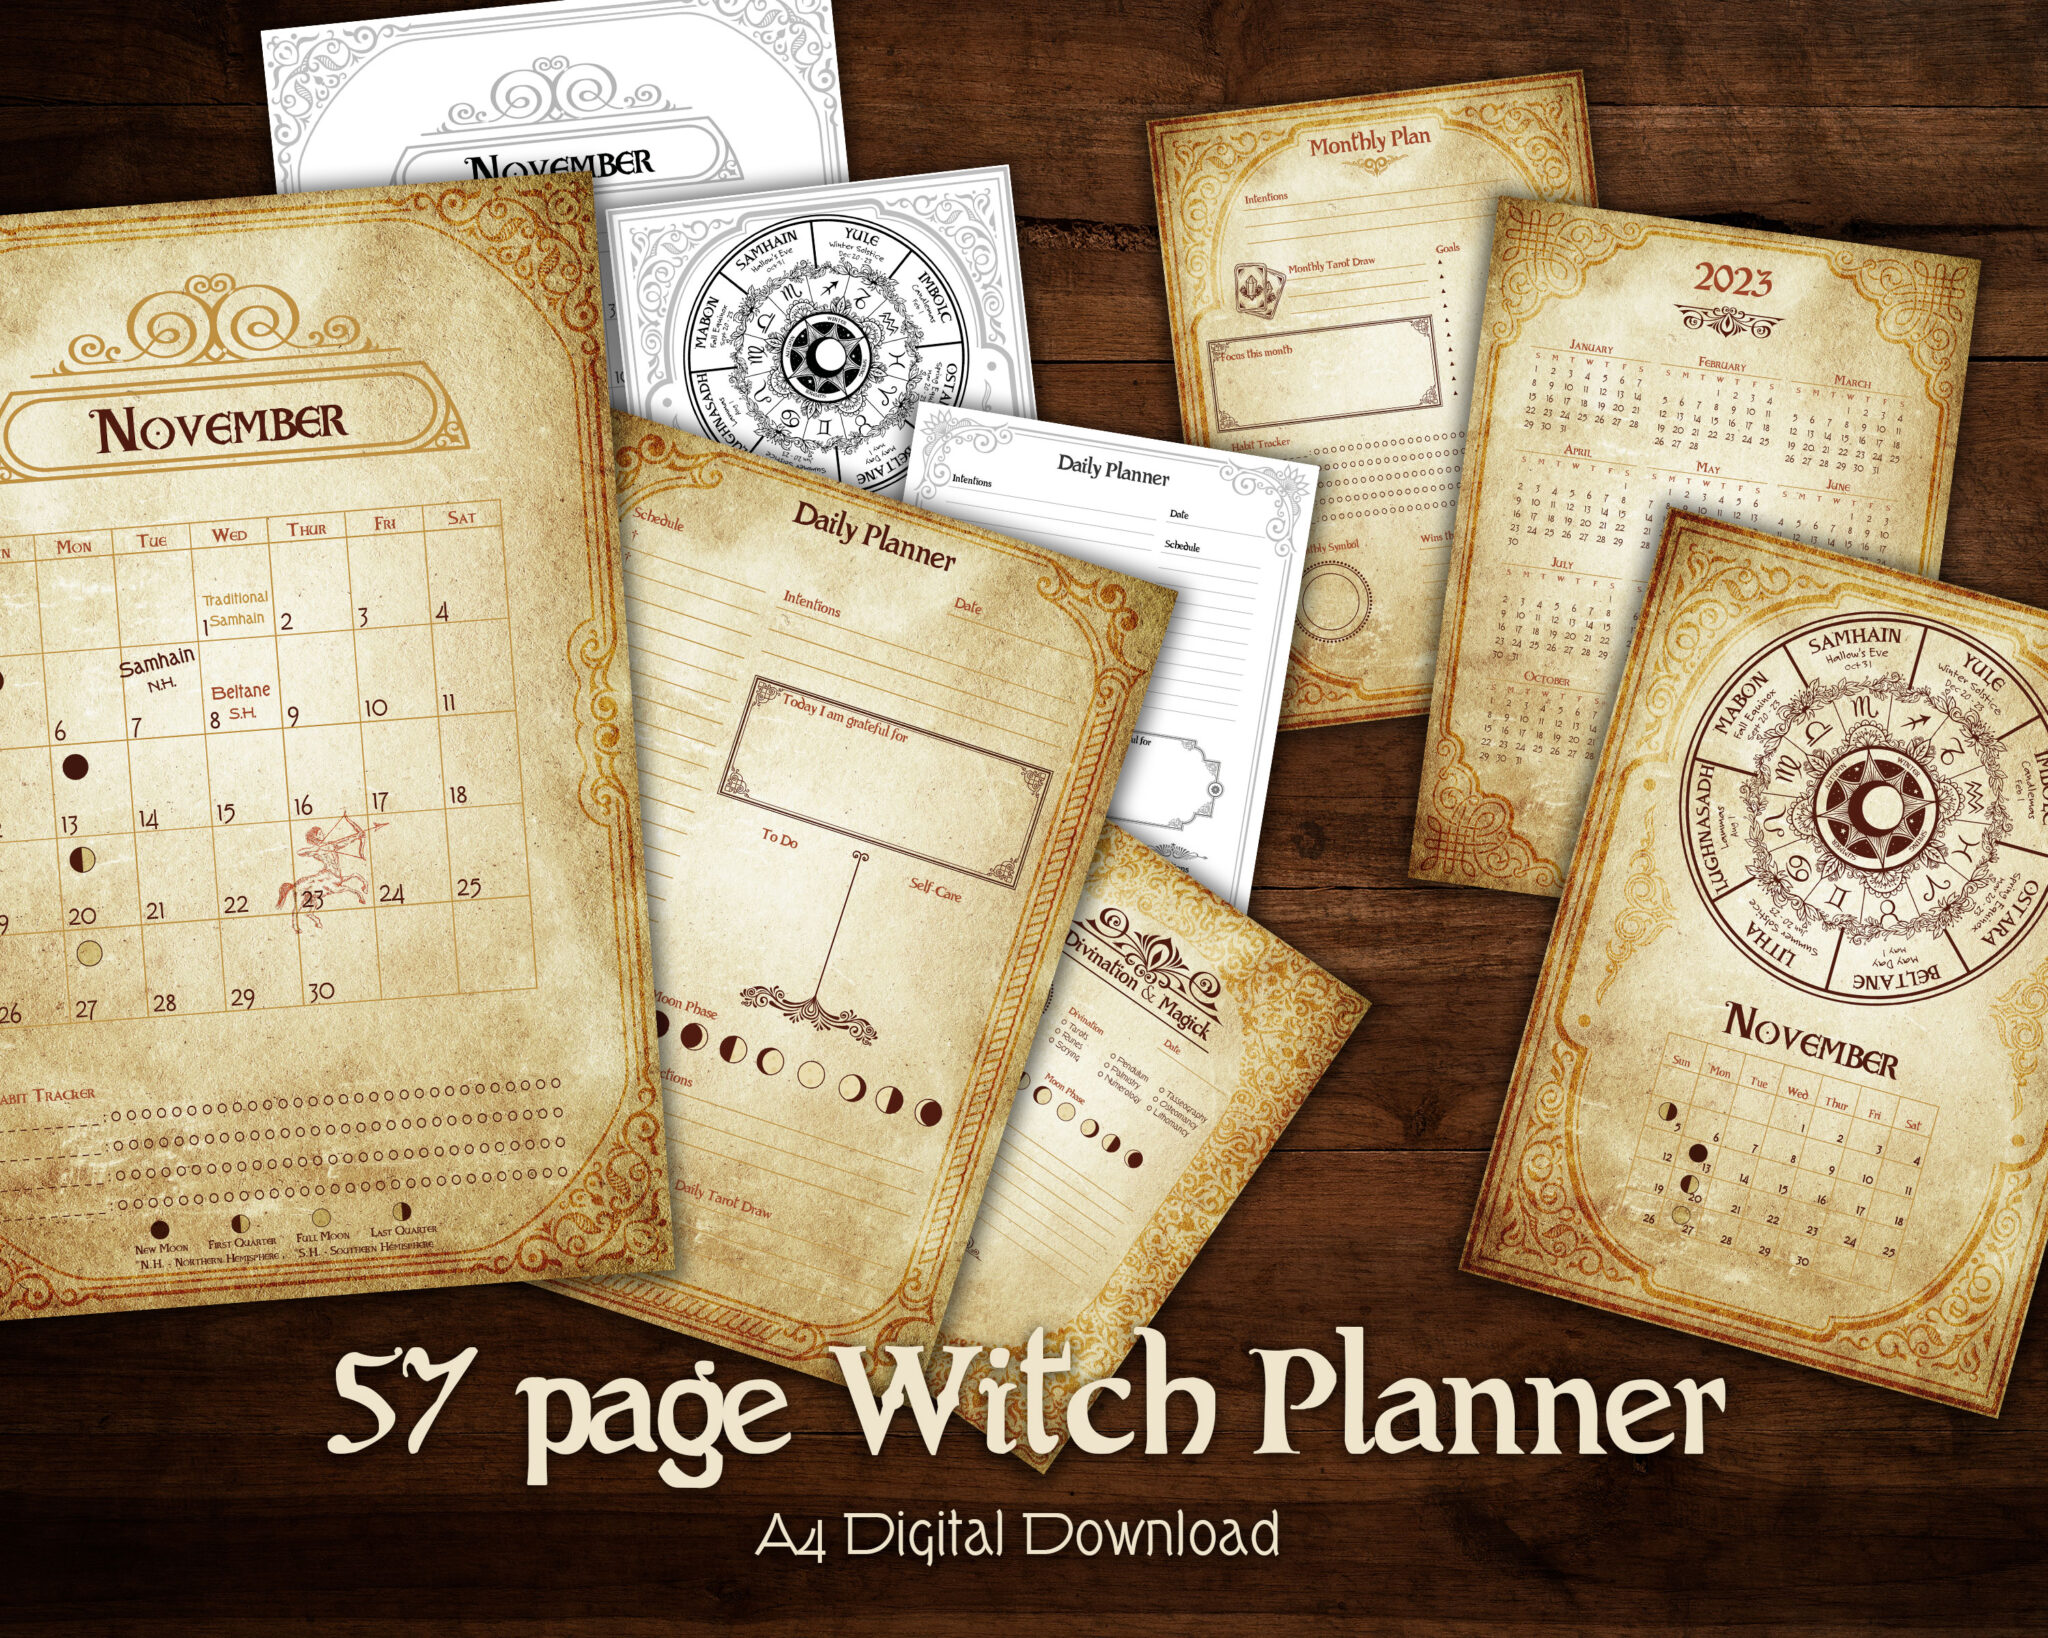 A4 Witch Planner and Organizer to help you with your spells, rituals, and magick.